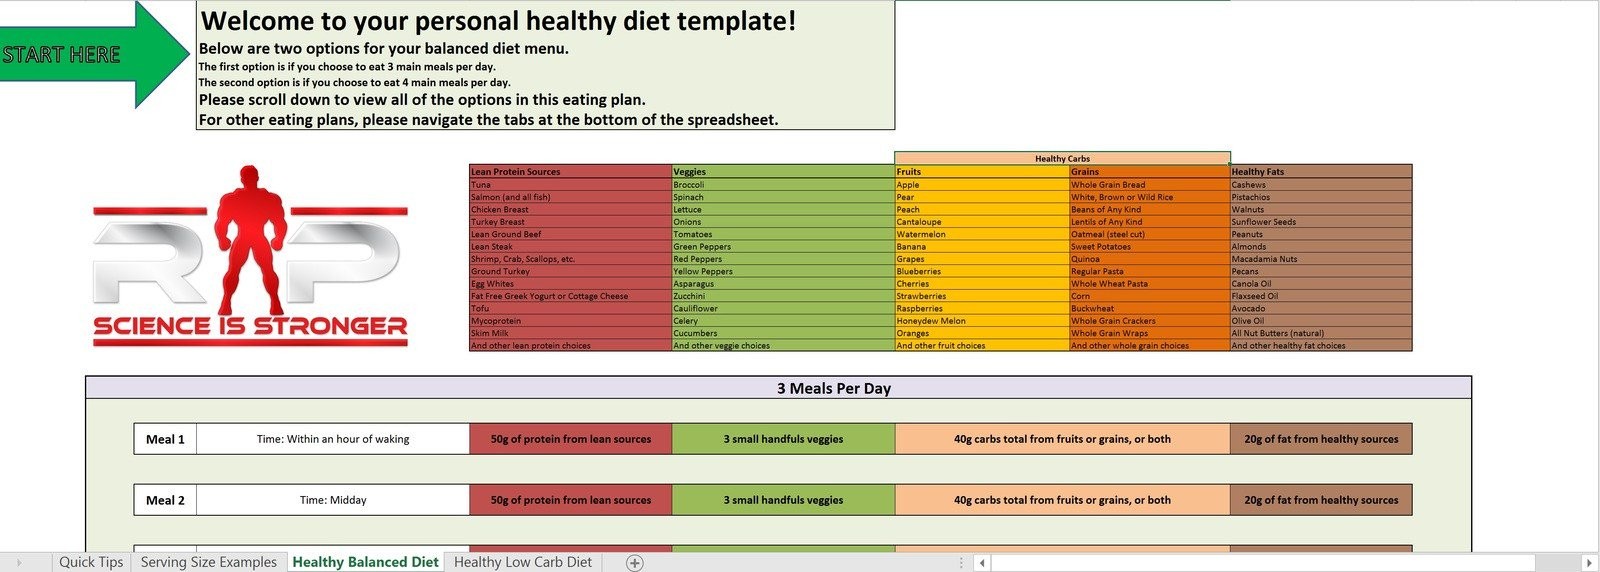 Renaissance Periodization Healthy Diet Templates Rp Strength Template